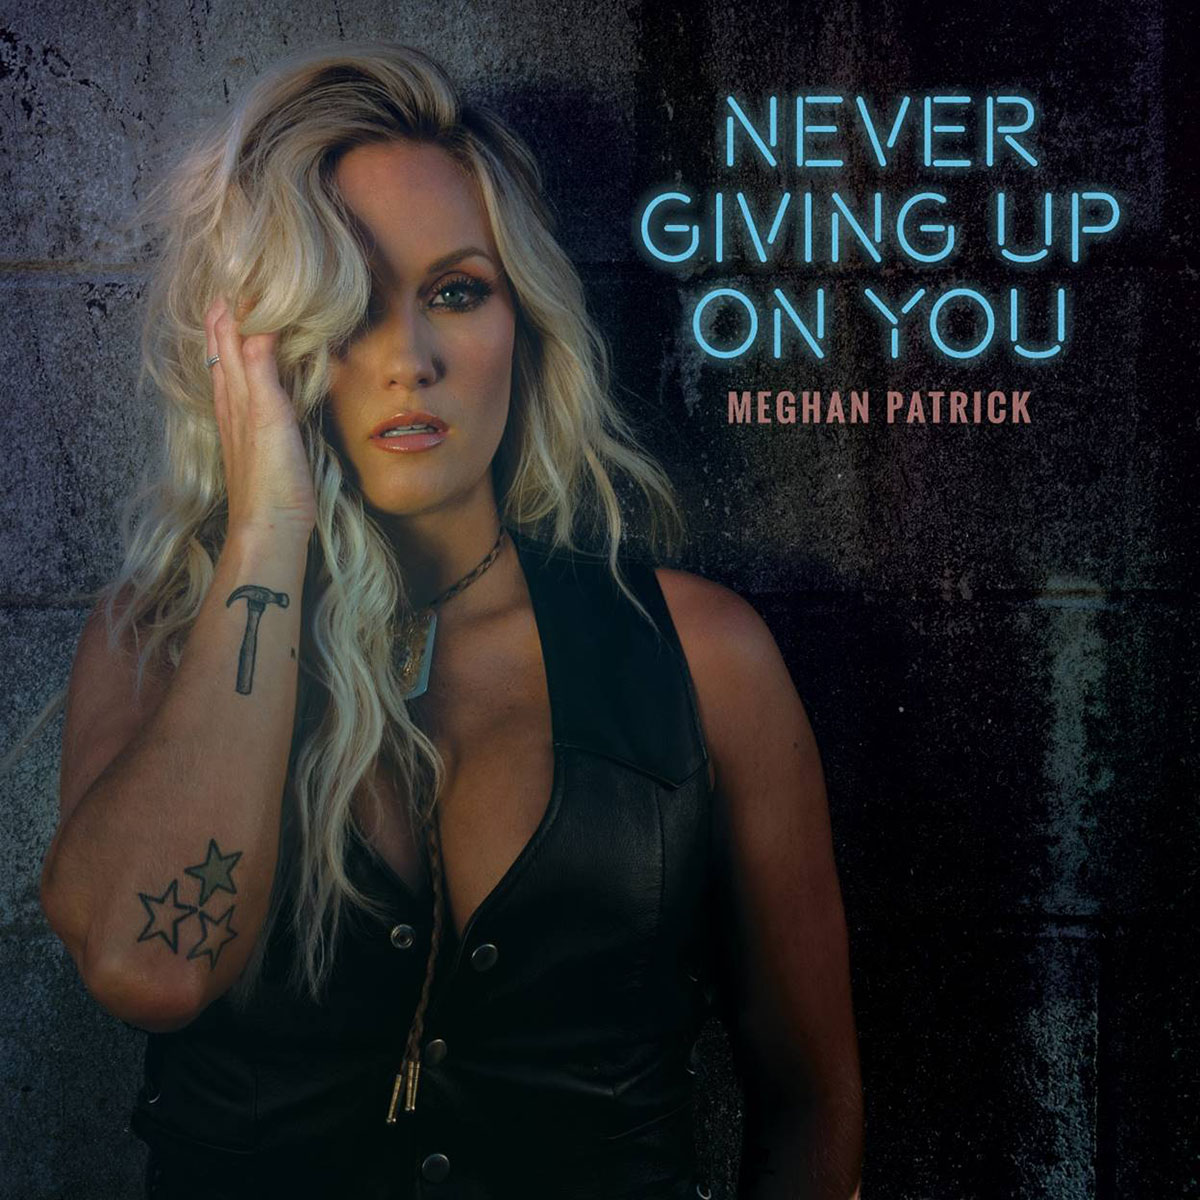 Meghan Patrick is “Never Giving Up On You”